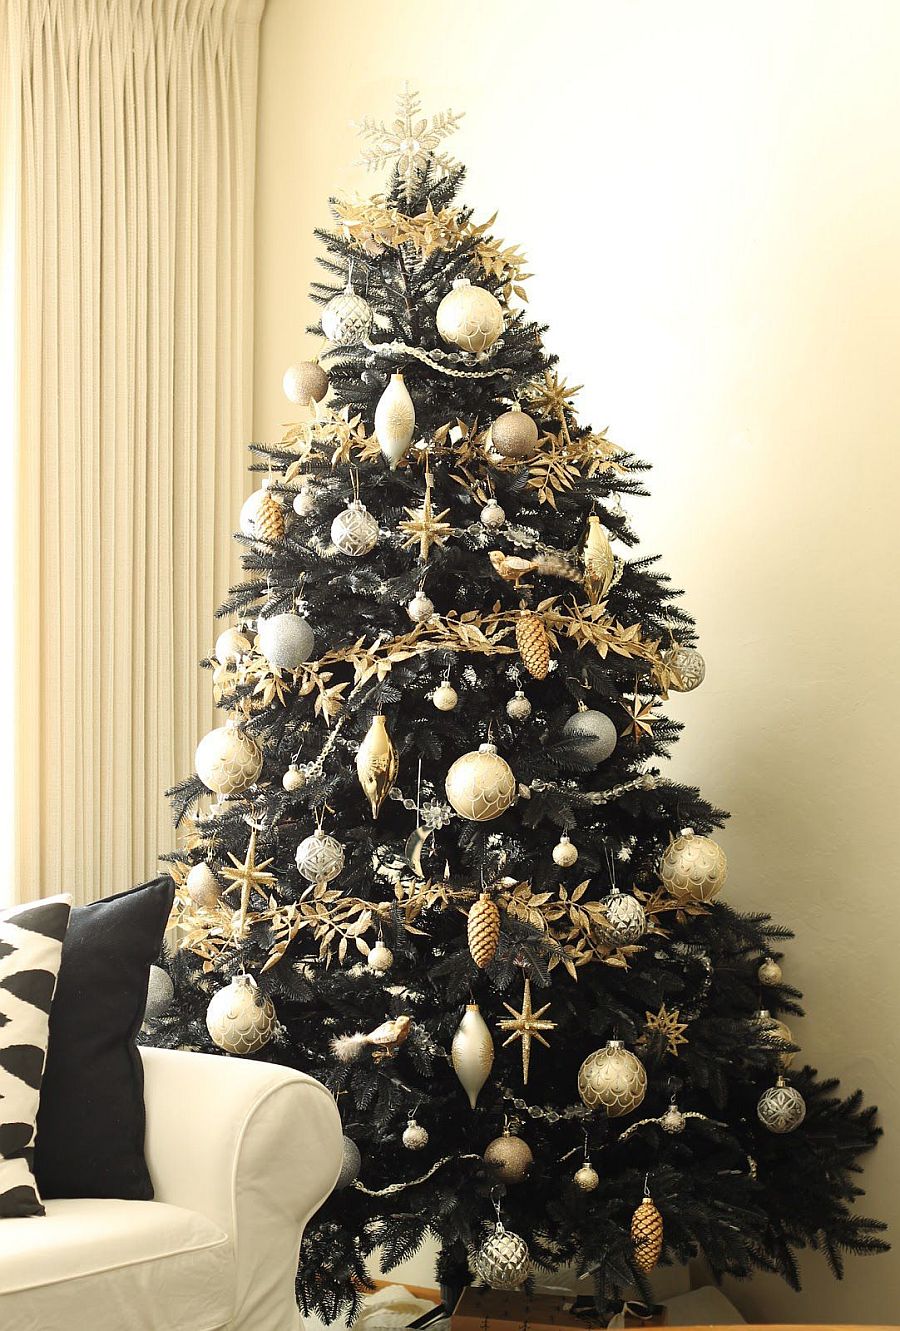 Gorgeous black Christmas tree decorated in gold feels both chic and unique